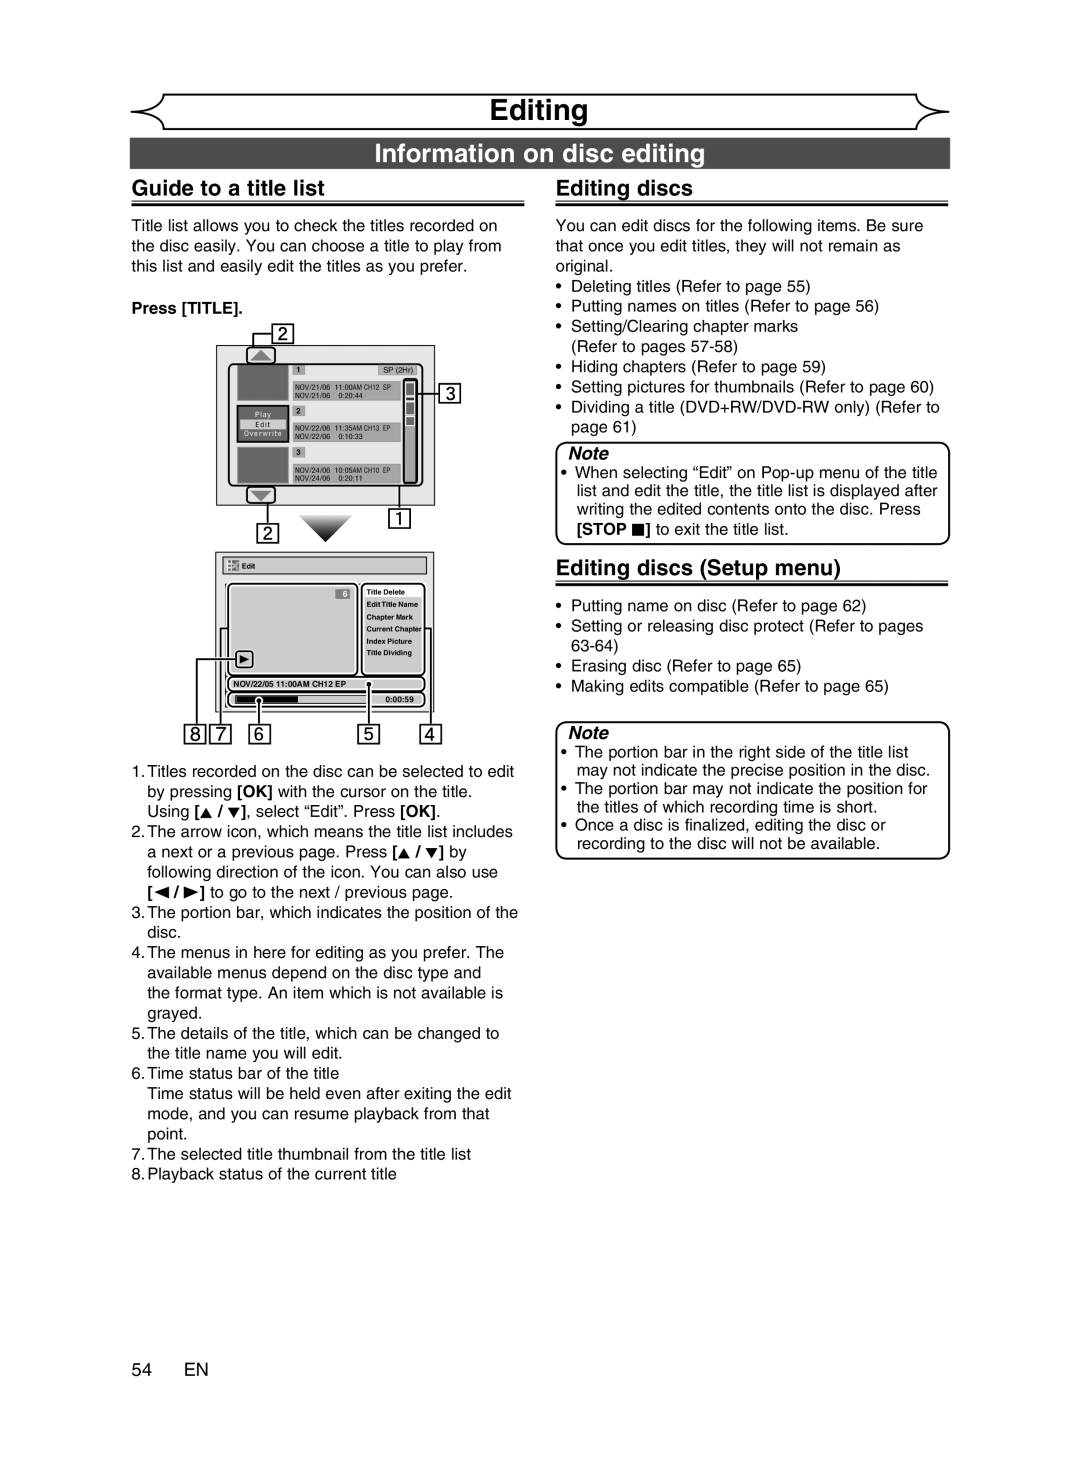 Magnavox cmwR20v6 manual Information on disc editing, Guide to a title list, Editing discs Setup menu 